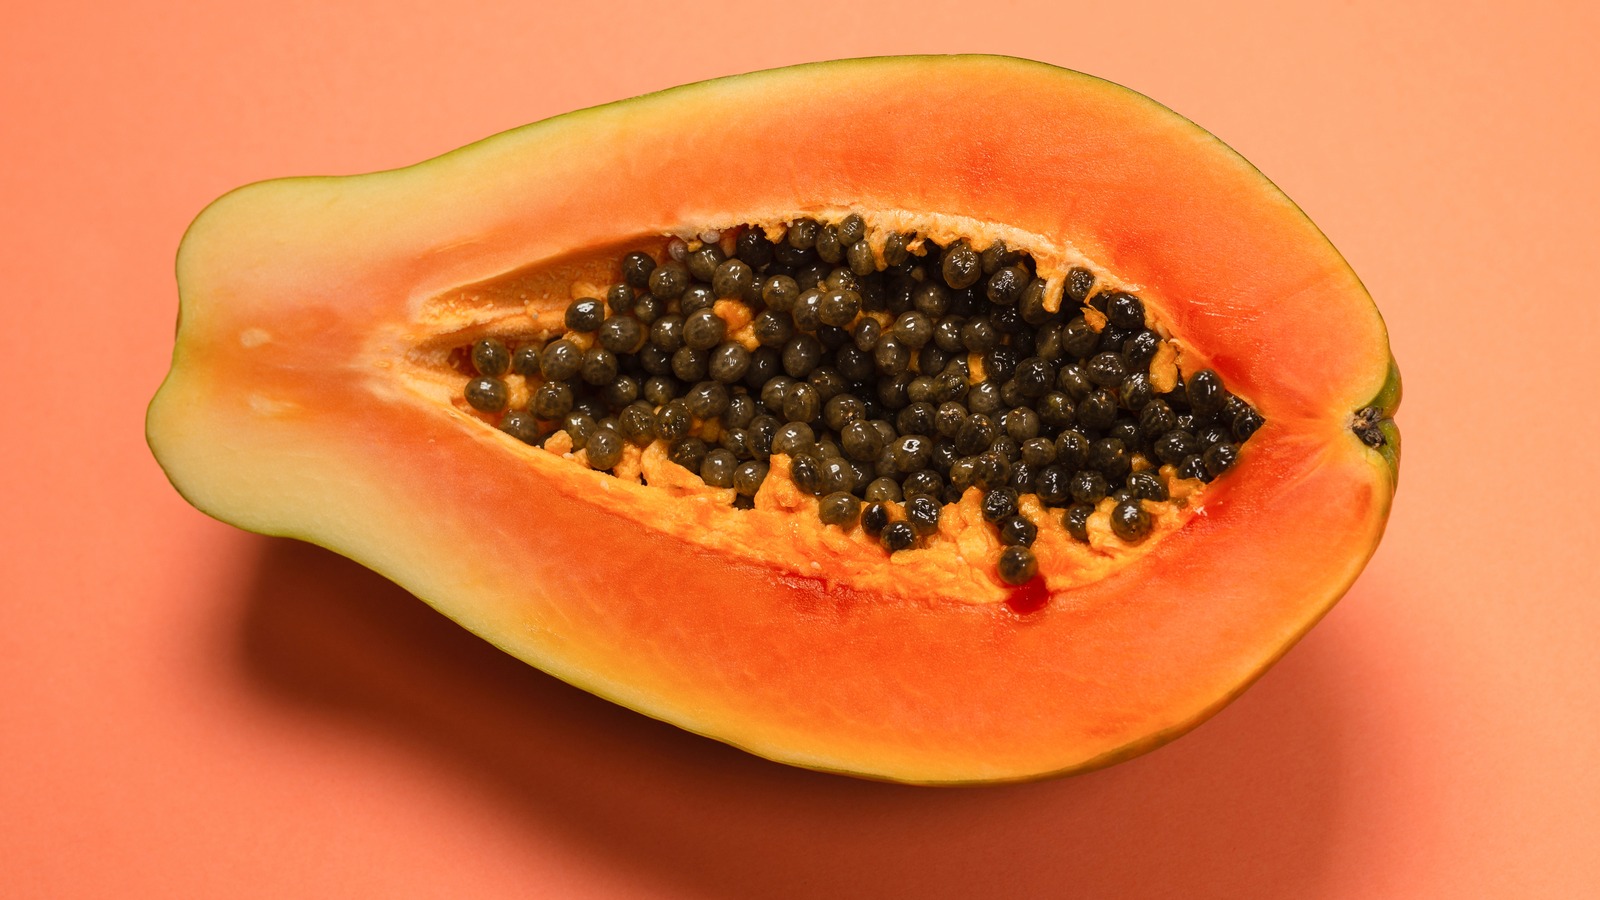 What You Probably Didn't Know About Papayas